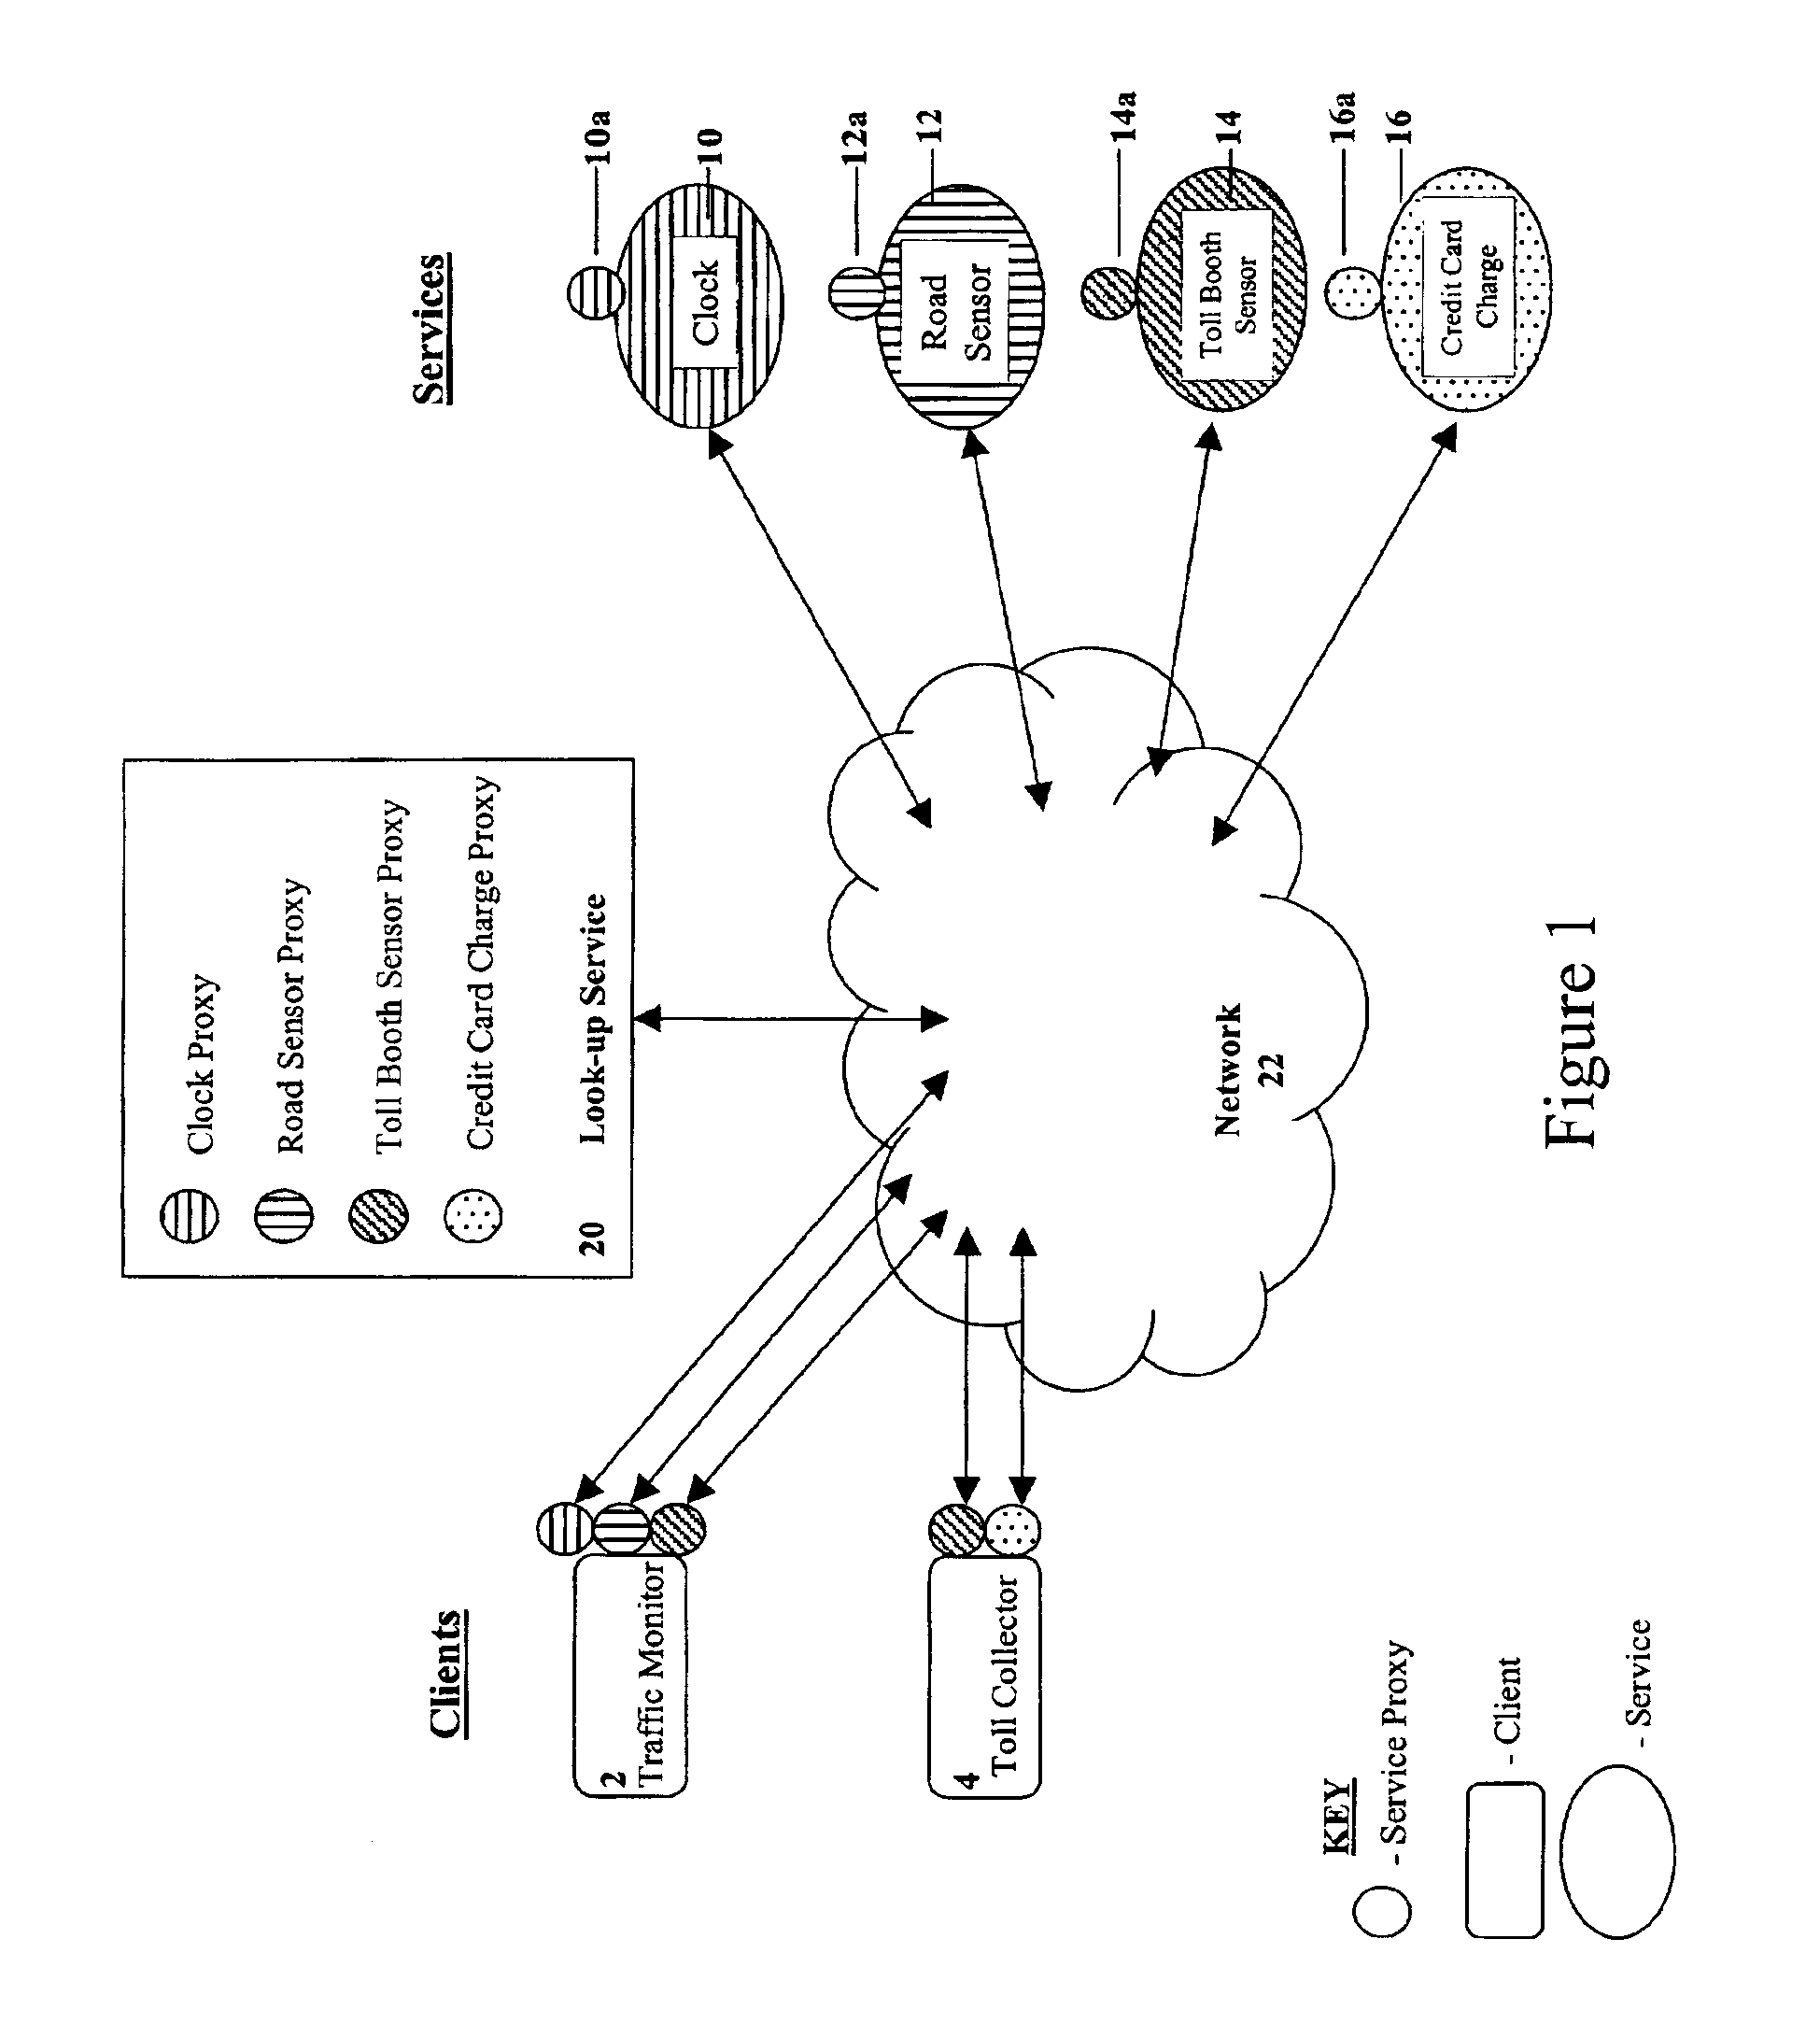 Method for handling transitions in grouped services in a distributed computing application